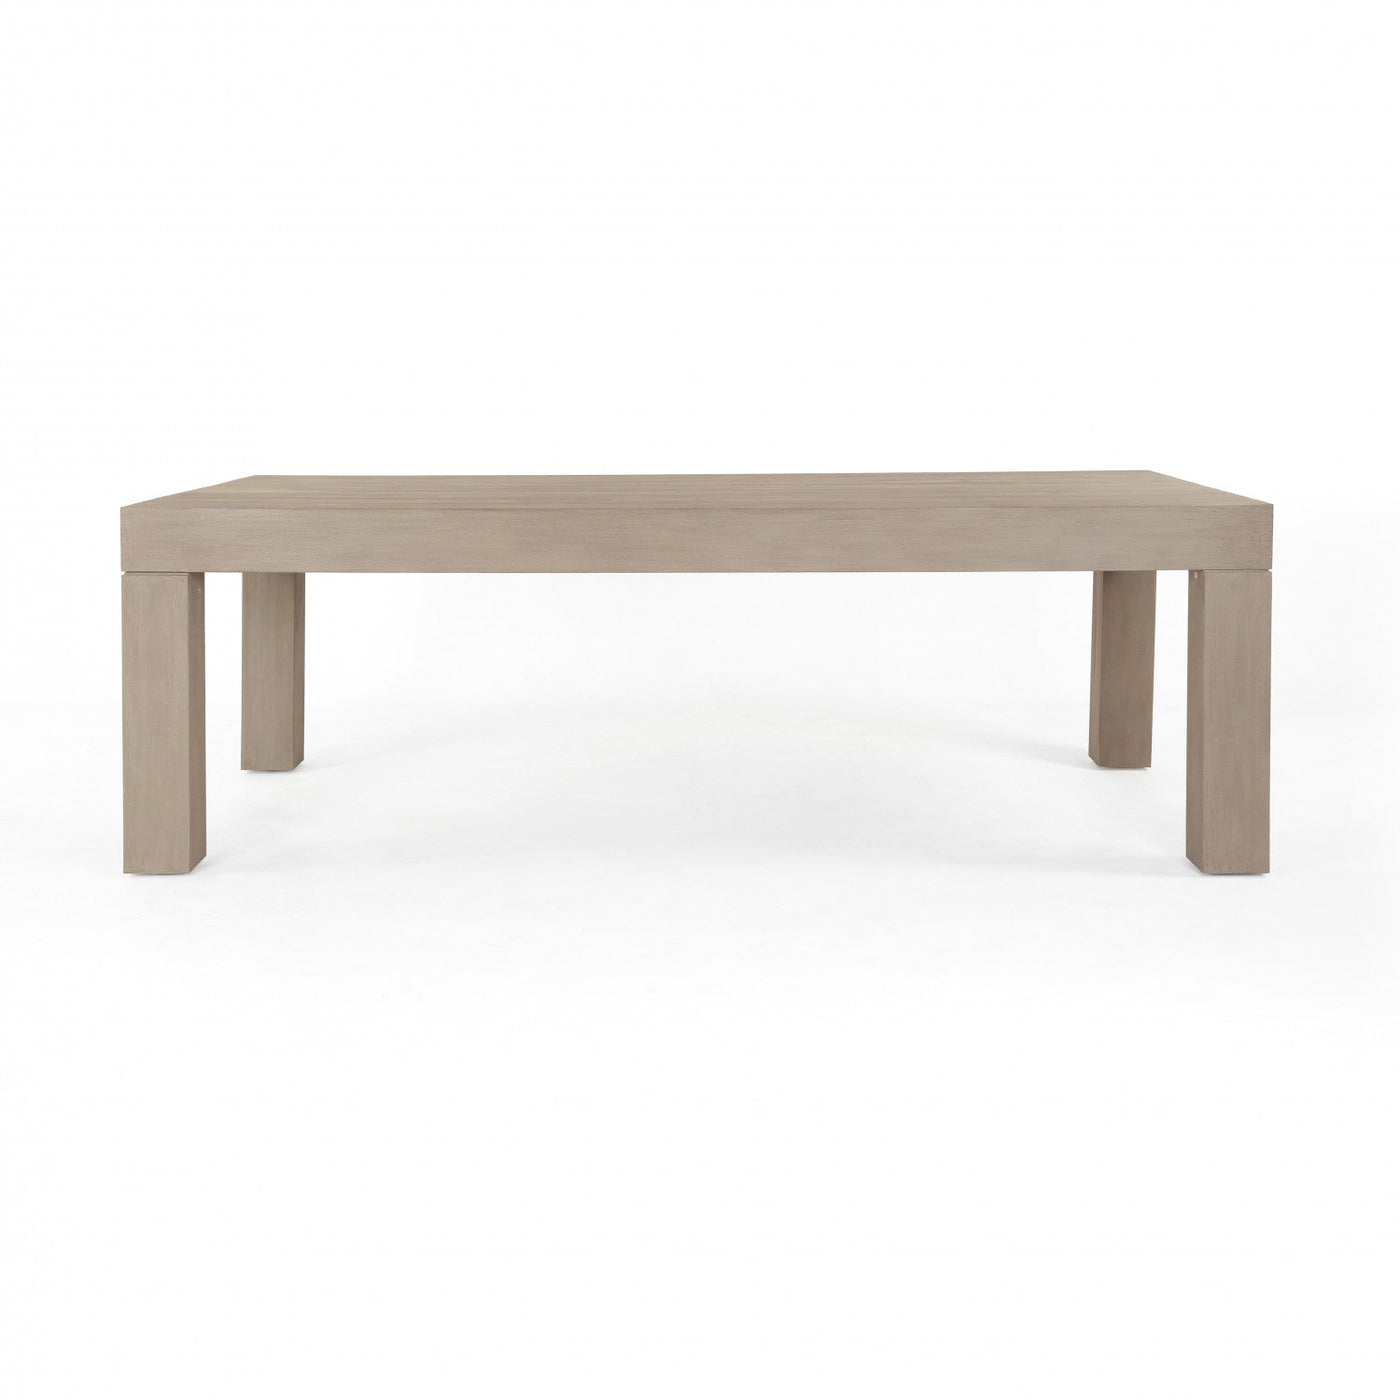 SONORA OUTDOOR DINING TABLE